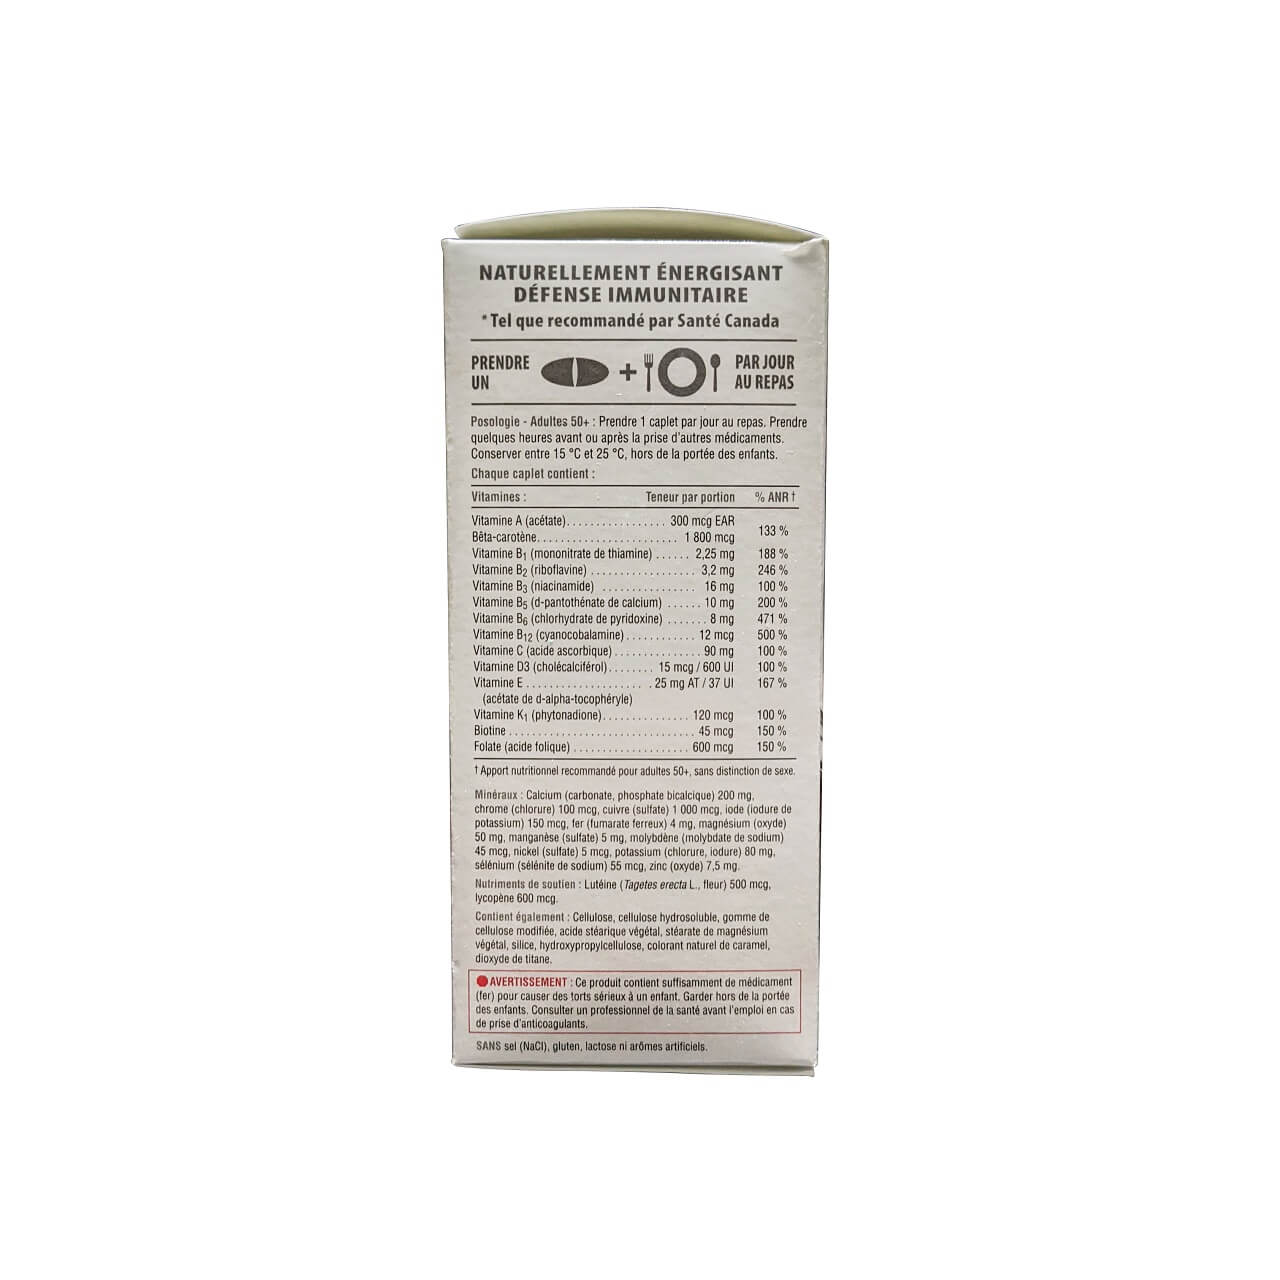 Directions, ingredients, and warnings for Jamieson Multi 100% Complete Vitamin for Adults 50+ (90 caplets) in French